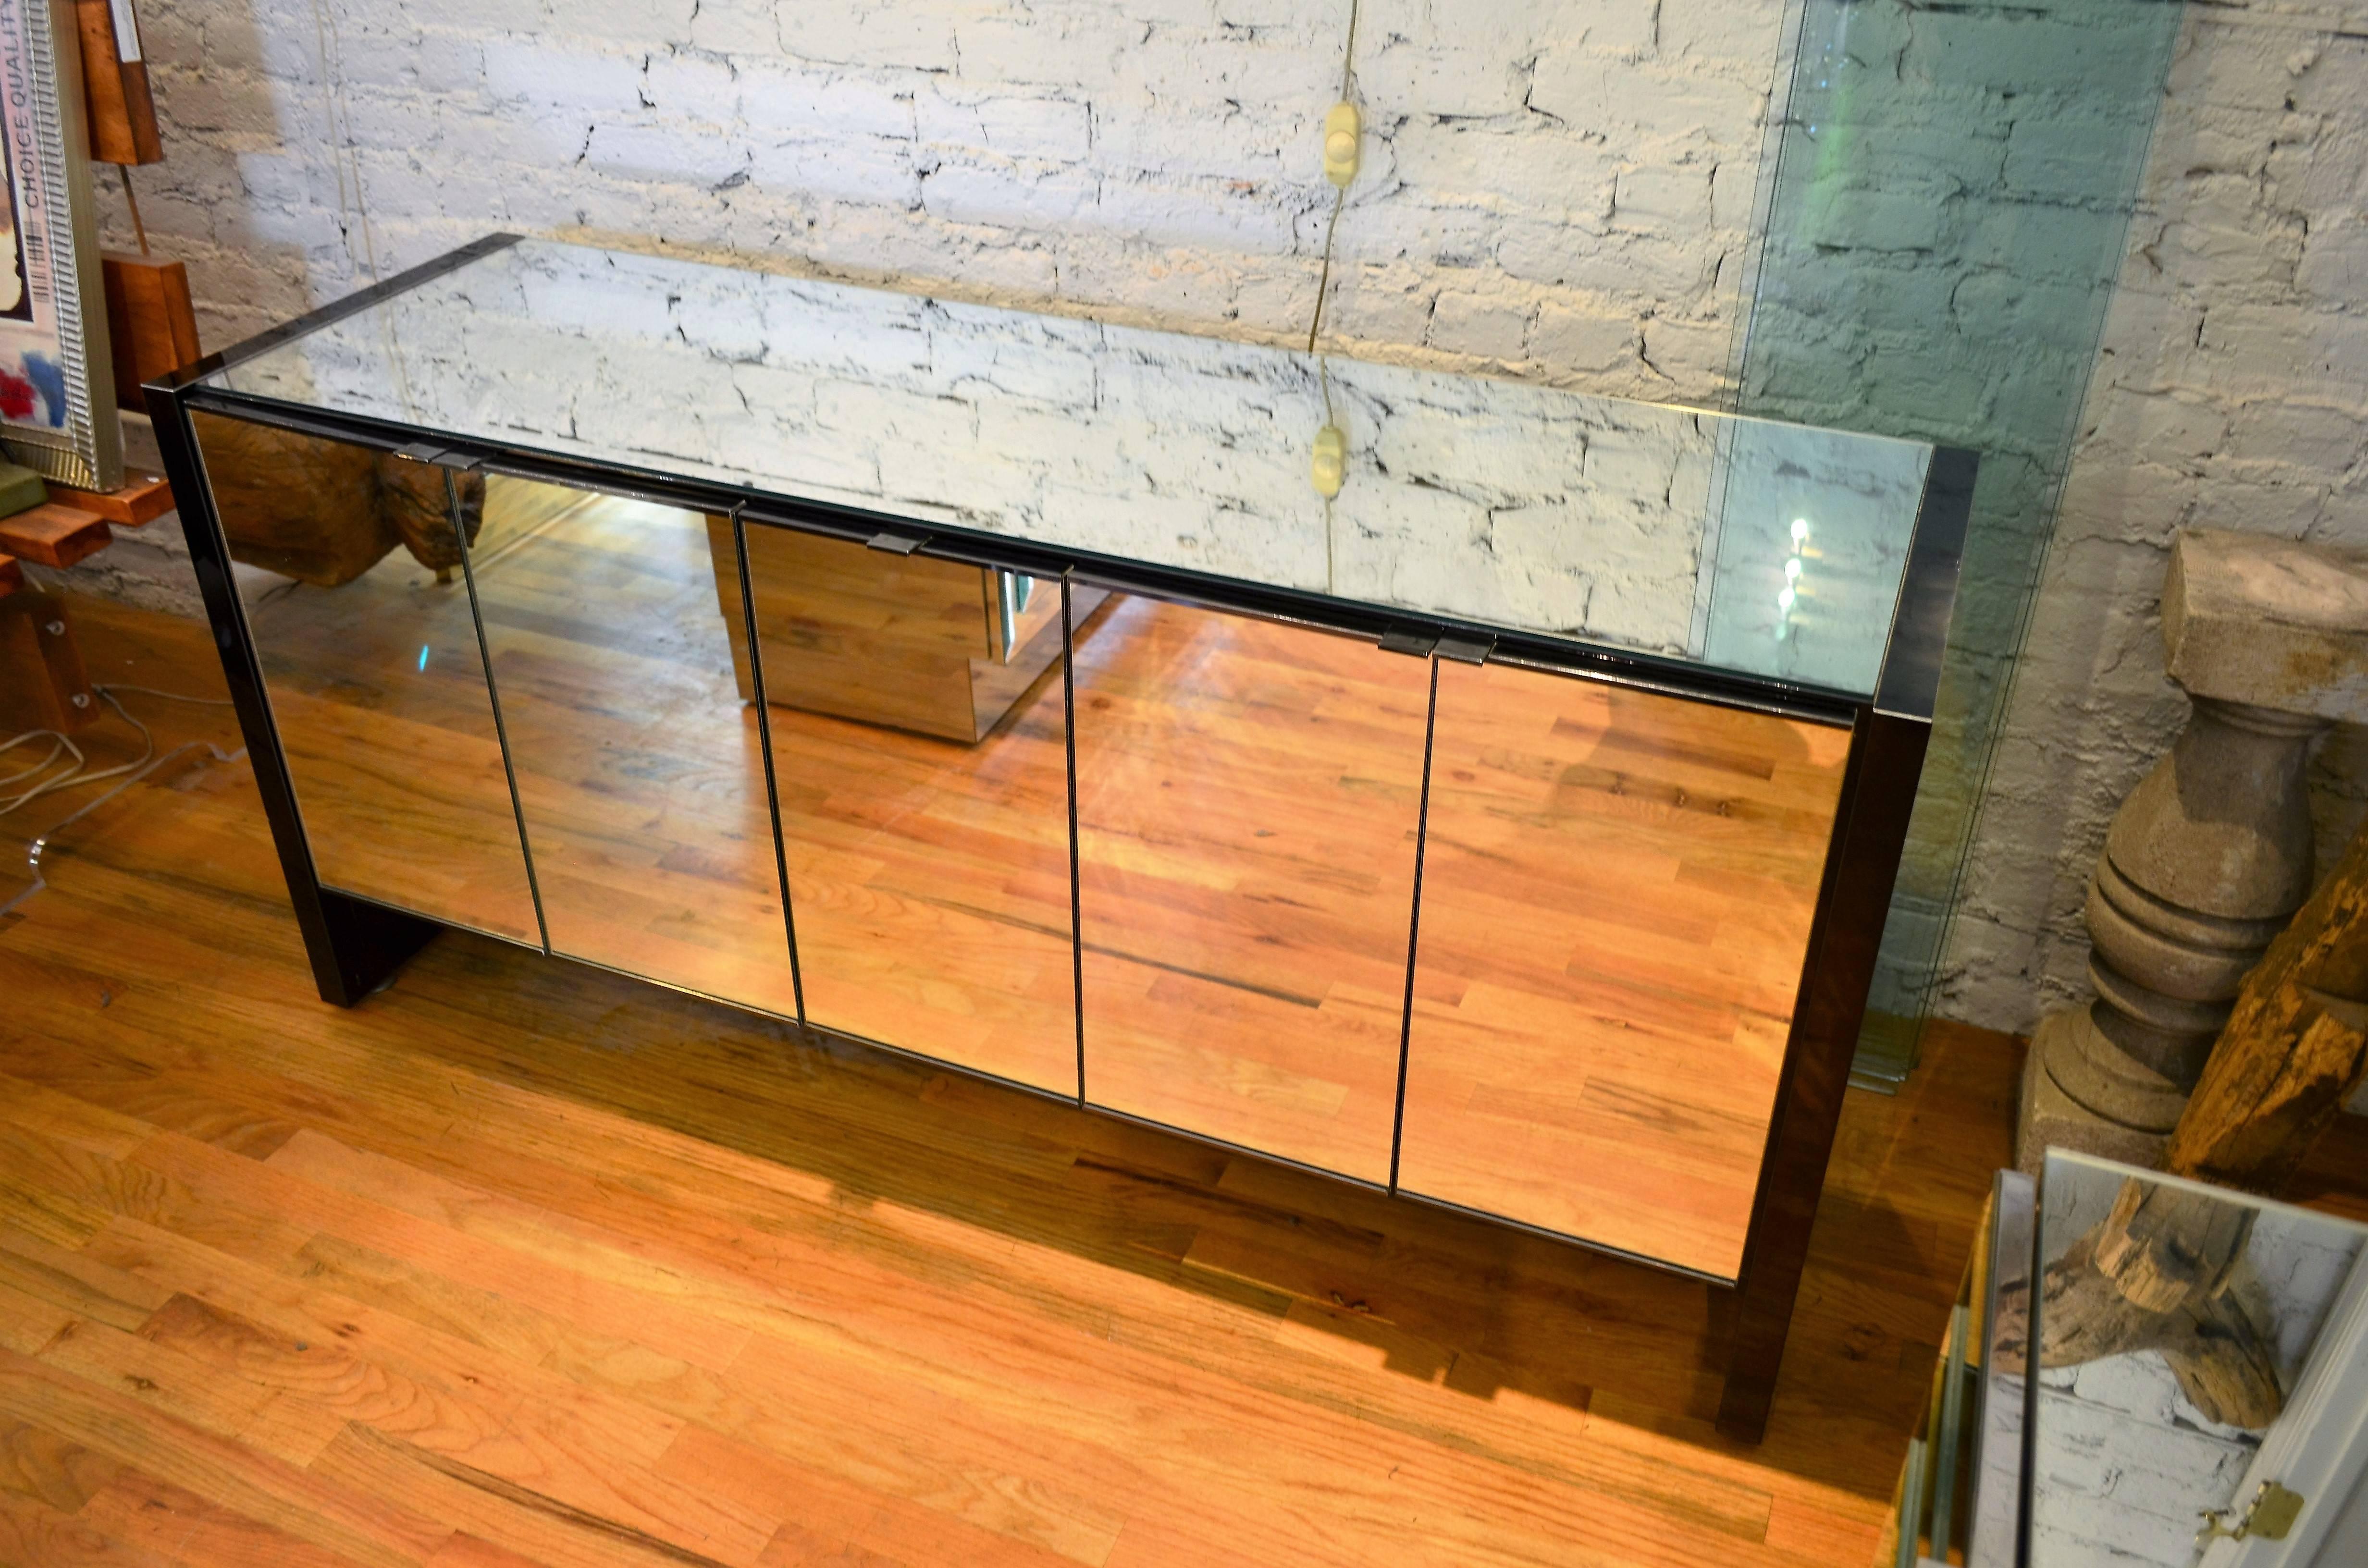 An outstanding and rare example of Ello's iconic Mid-Century mirrored credenza.
The piece features mirrored doors and top accented with black chrome sides, trim and pulls.
Three compartments each contain an adjustable shelf. A highly versatile